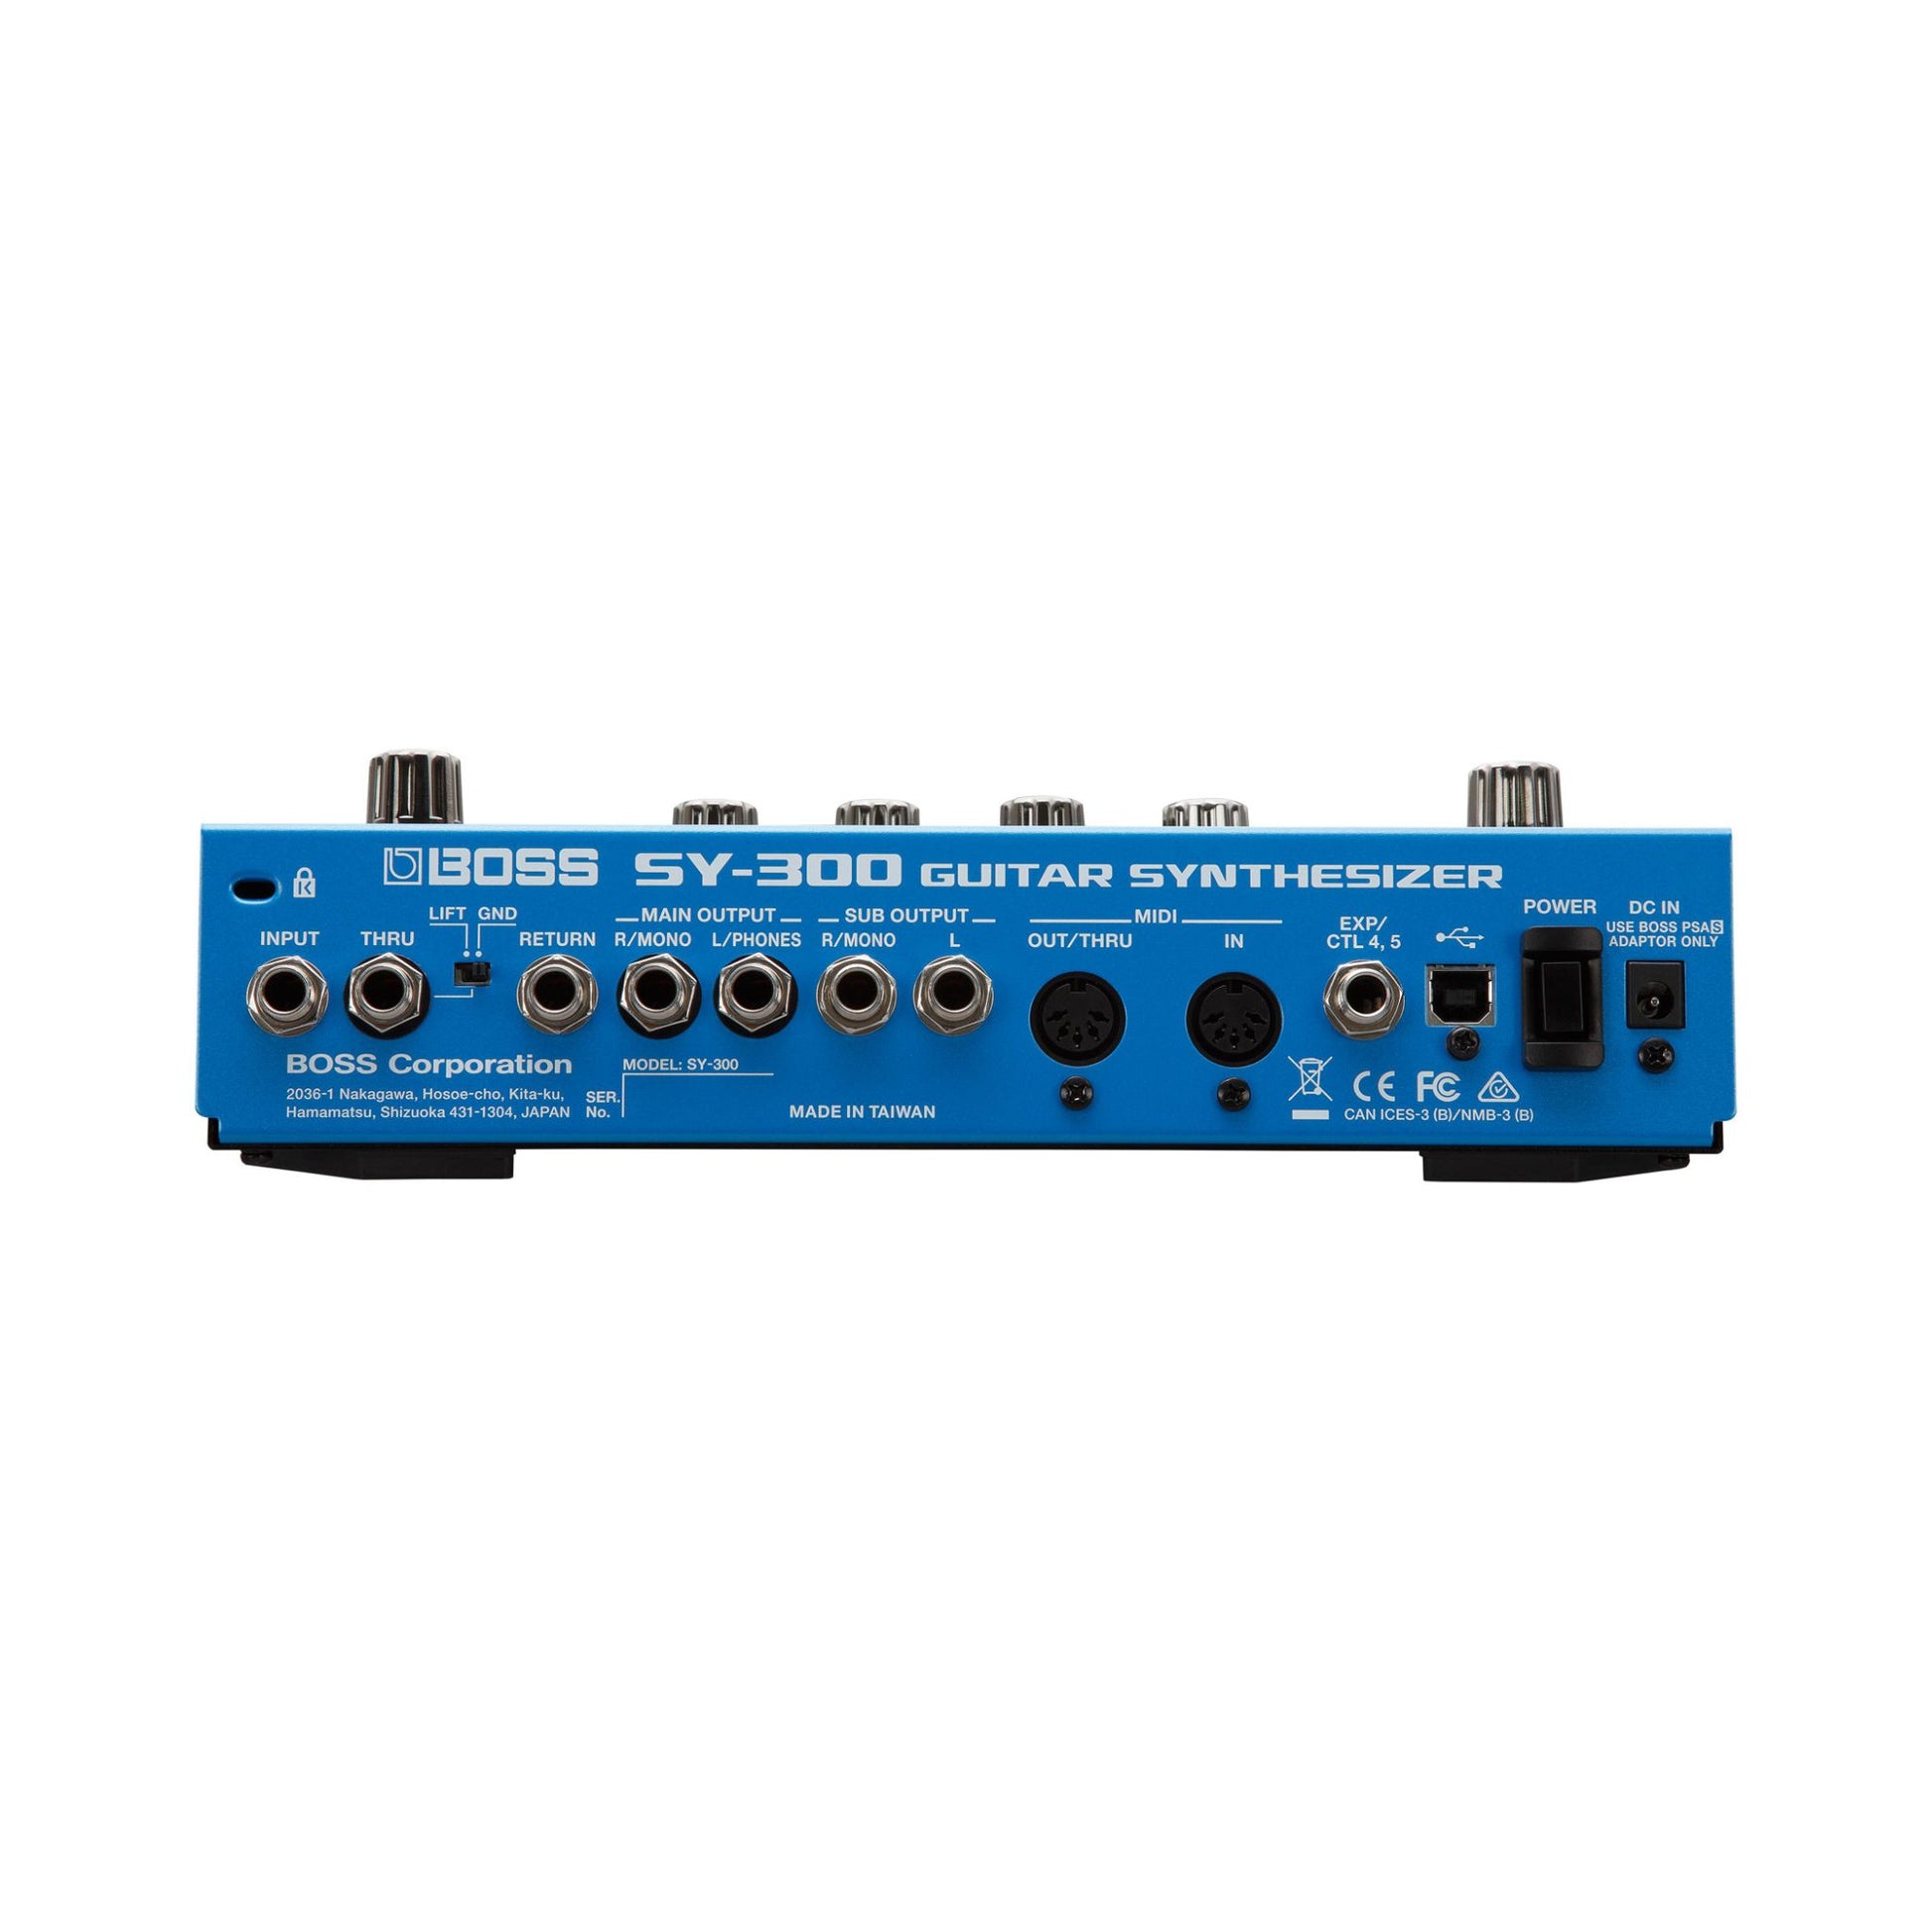 Pedal Guitar Boss SY-300 Guitar Synthesizer - Việt Music